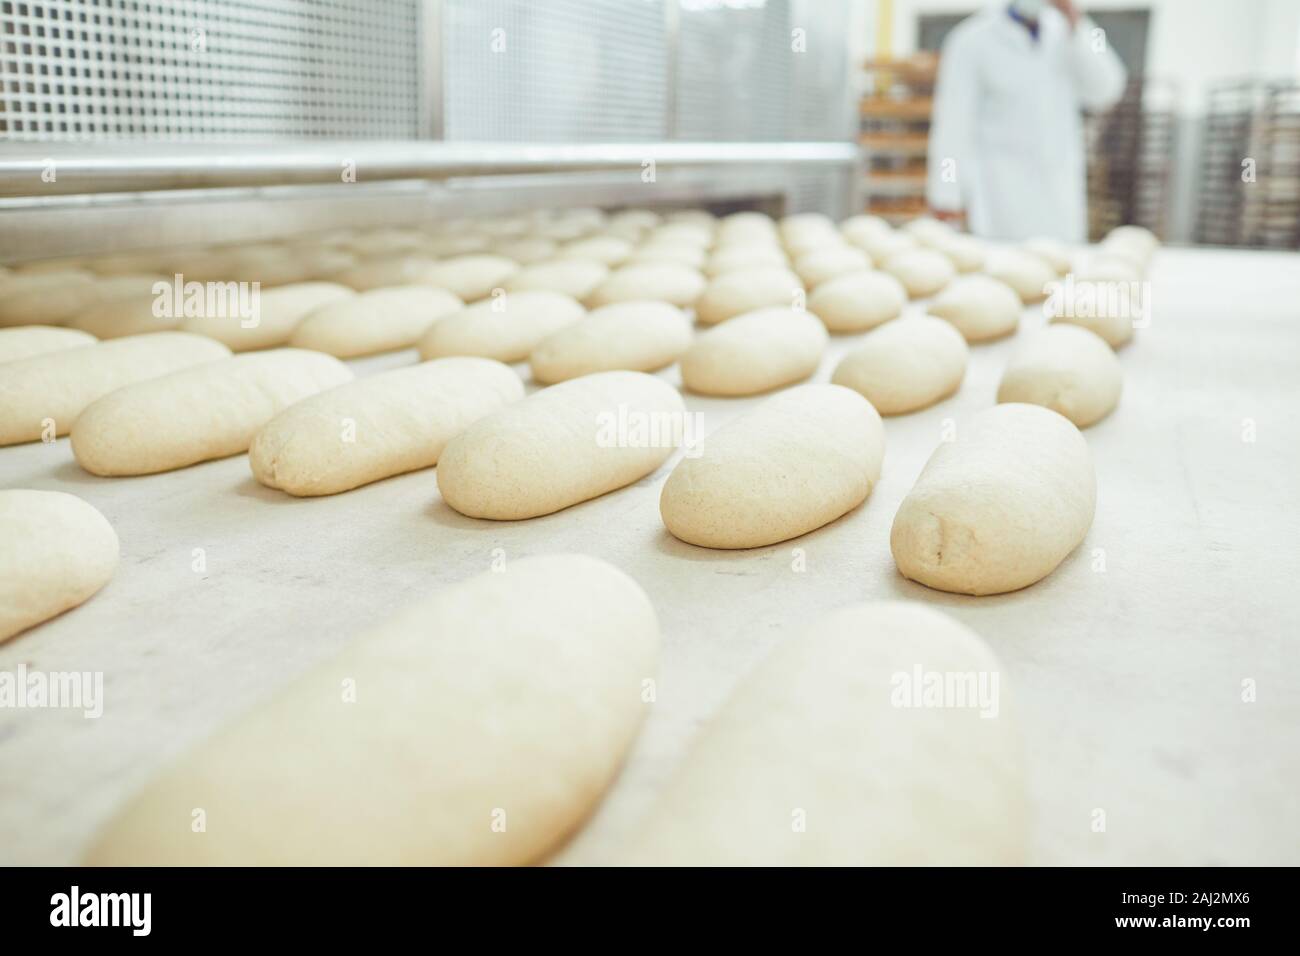 https://c8.alamy.com/comp/2AJ2MX6/raw-bread-is-making-on-the-automatic-equipment-line-in-the-bakery-2AJ2MX6.jpg